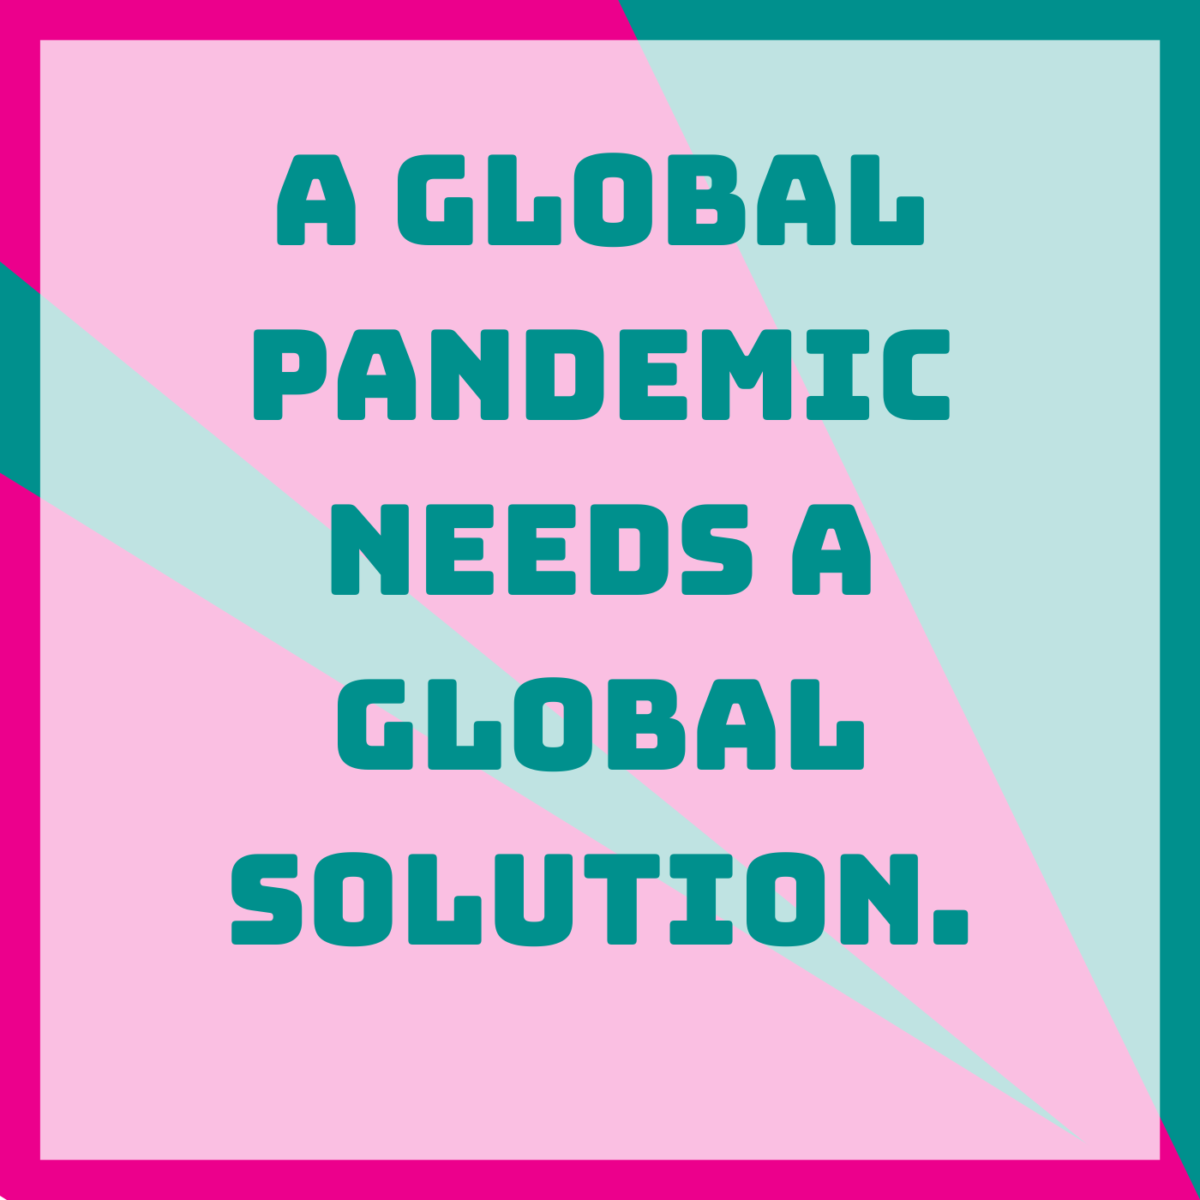 A global pandemic needs a global solution.